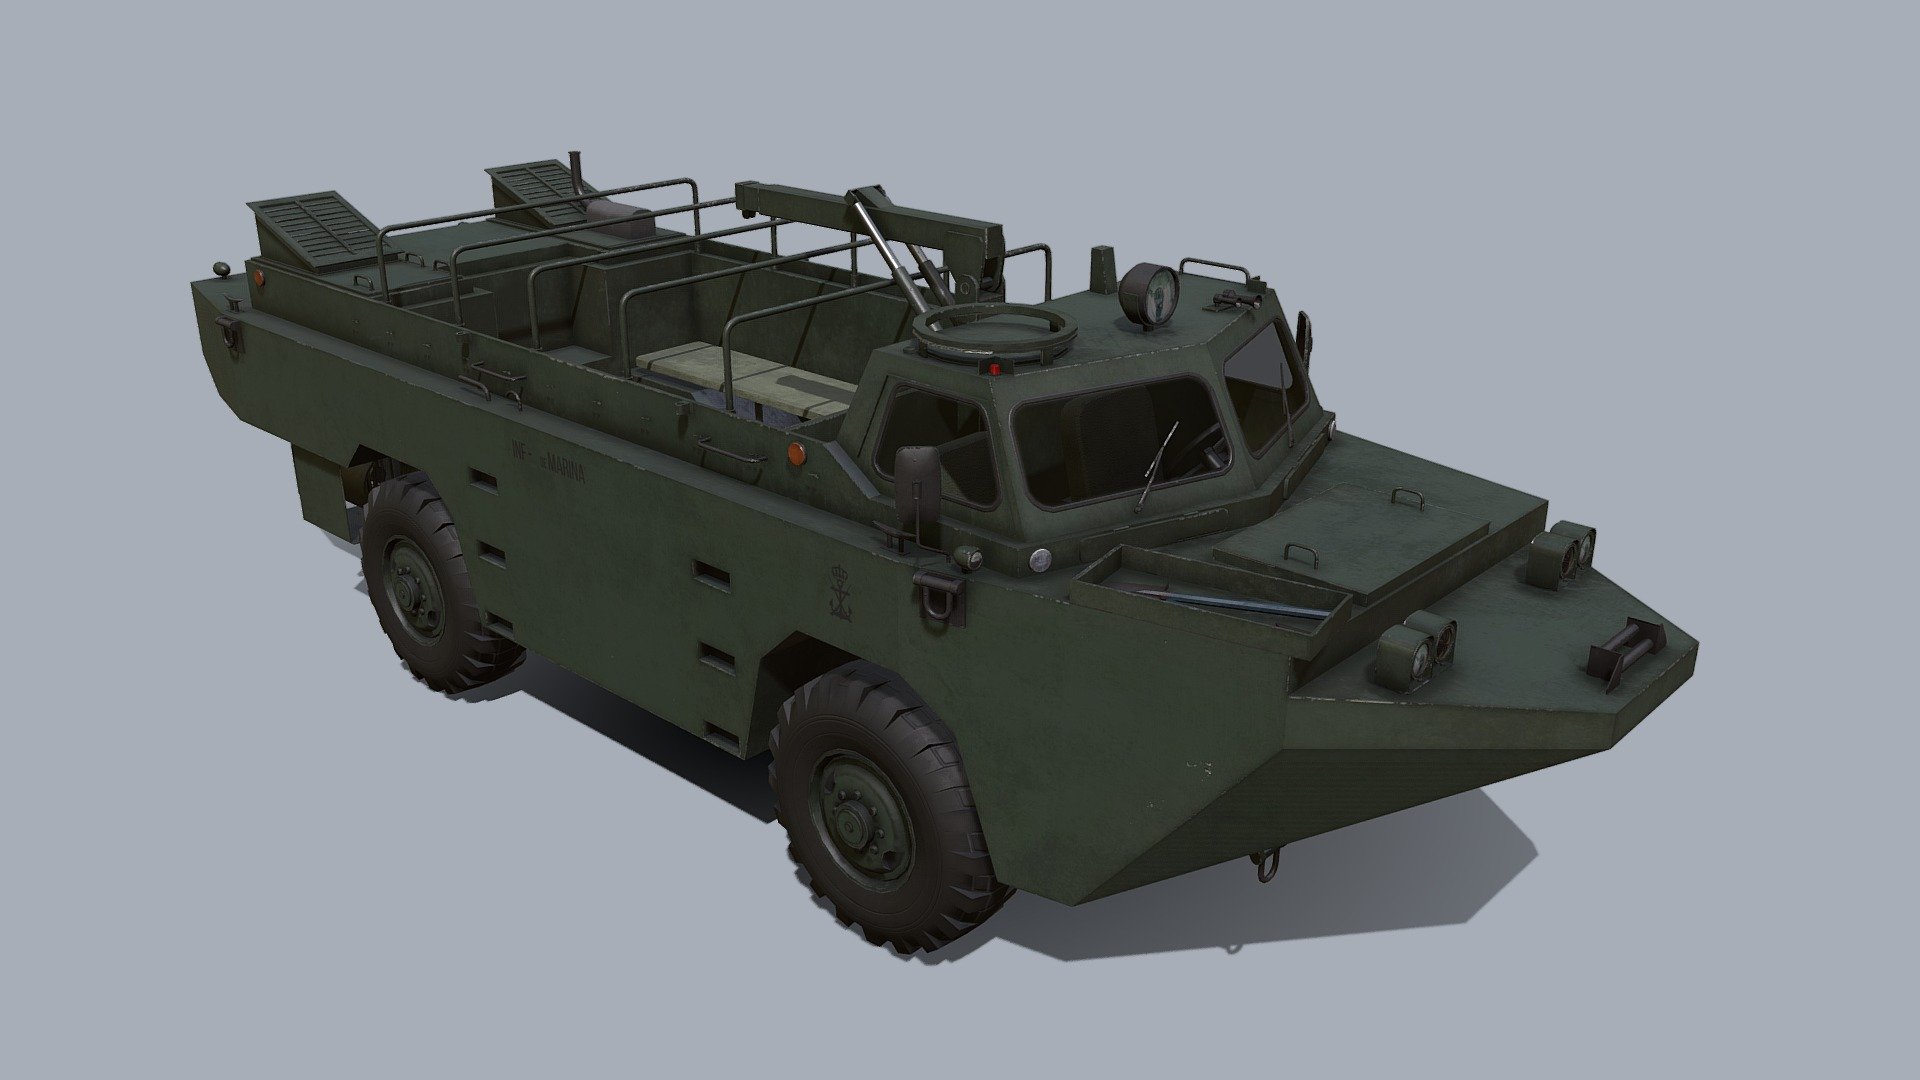 The Pegaso VAP 3550/1 was an amphibious cargo vehicle produced by ENASA for the Spanish Marine Corps and for export. In addition to supplying the Spanish Marines, VAP was exported to Mexico and Egypt - Pegaso 3550 1 VAP - Buy Royalty Free 3D model by Tim Samedov (@citizensnip) 3d model